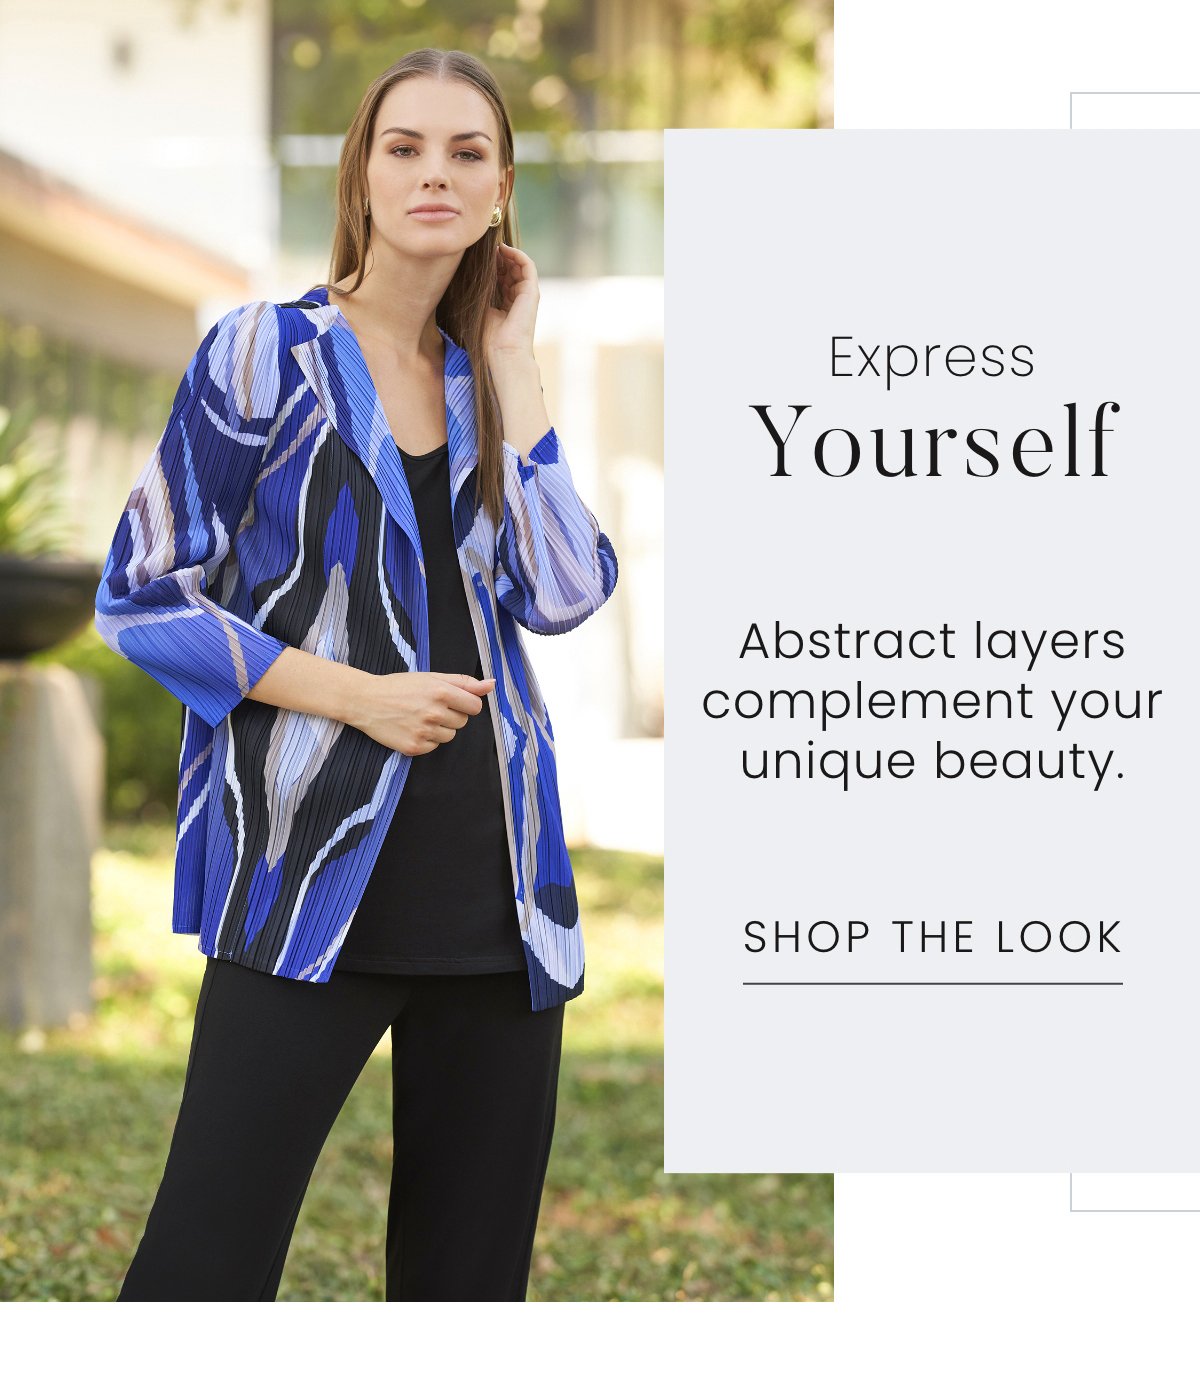 Express Yourself - Abstract layers complement your unique beauty. Shop the Look >>